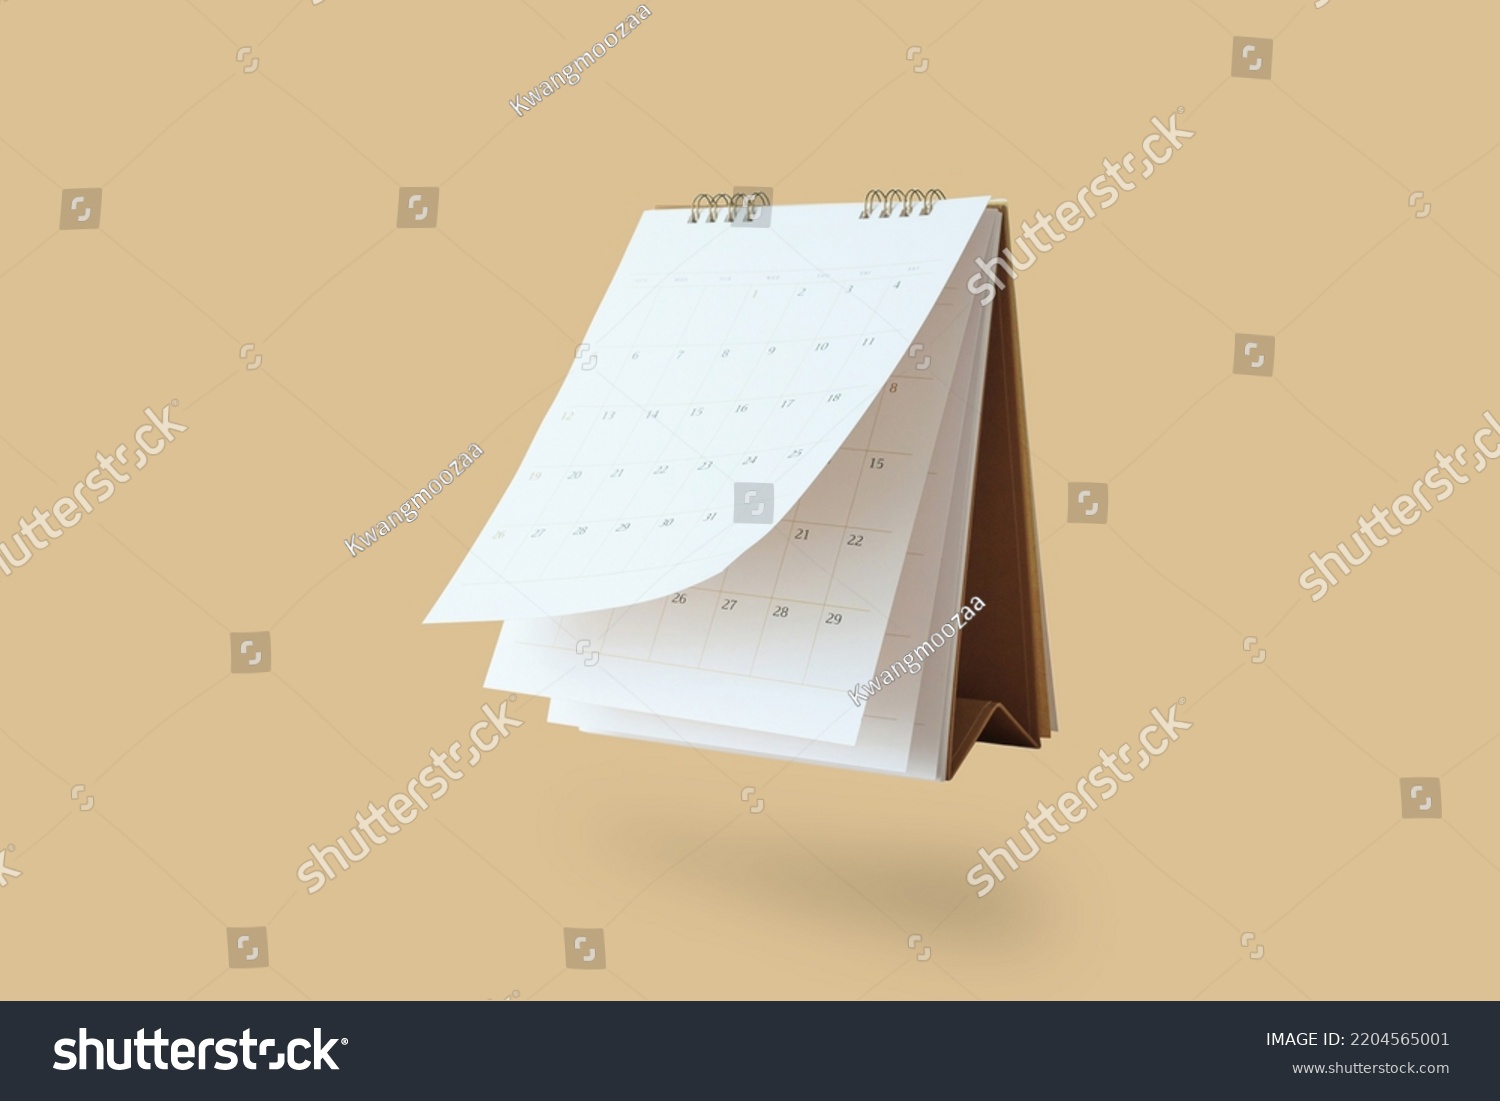 White paper desk calendar flipping page mockup isolated on brown background #2204565001